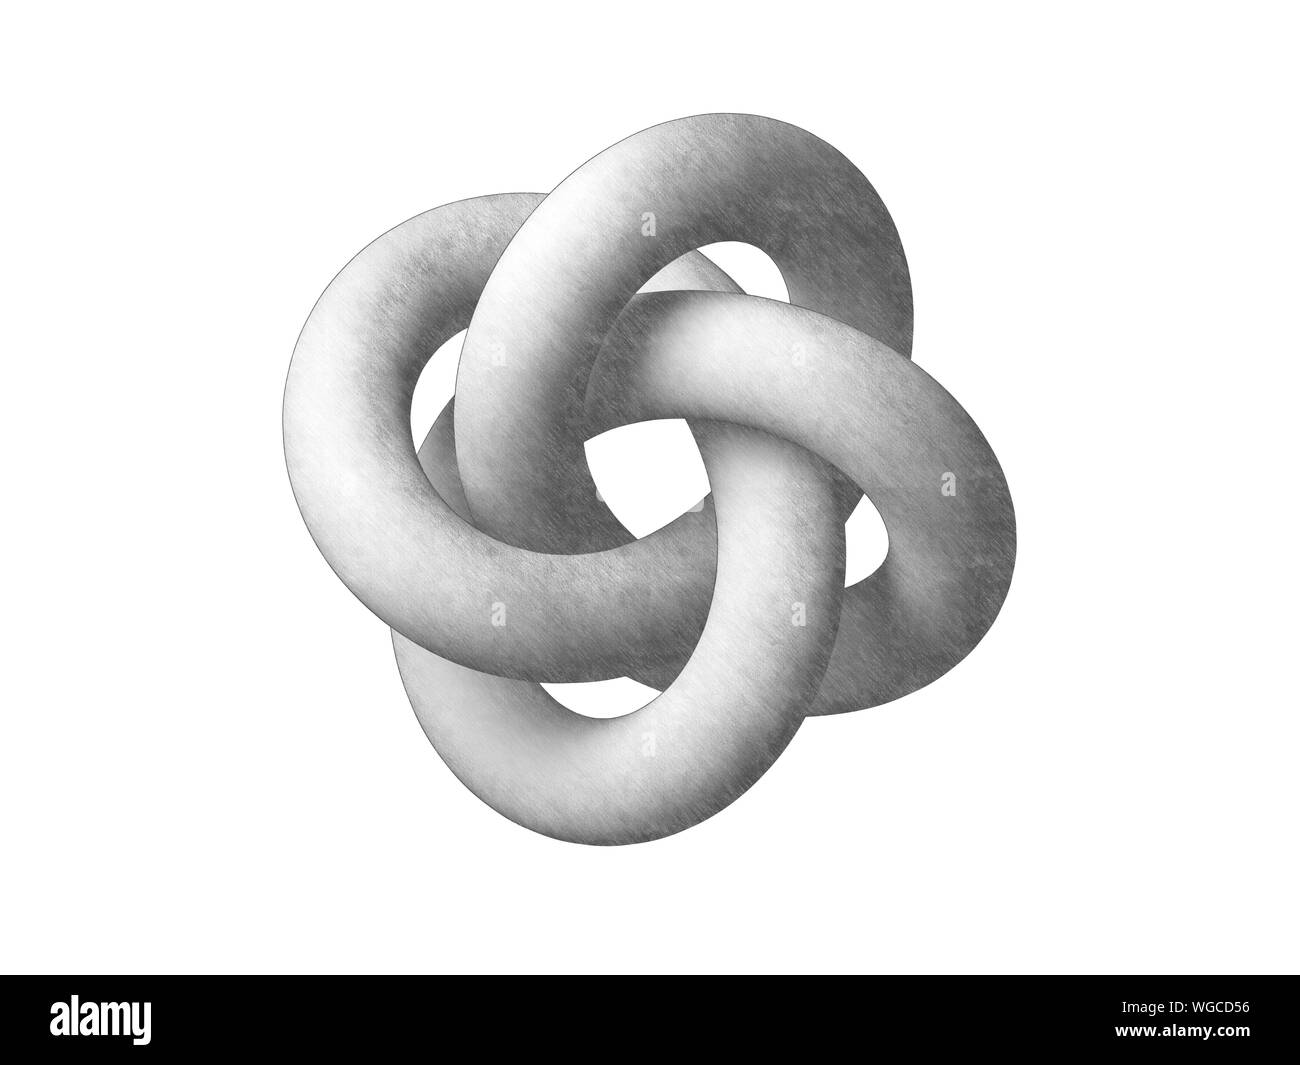 Torus knot geometrical representation. Abstract object isolated on white background. Graphite pencil stylized 3d rendering illustration Stock Photo